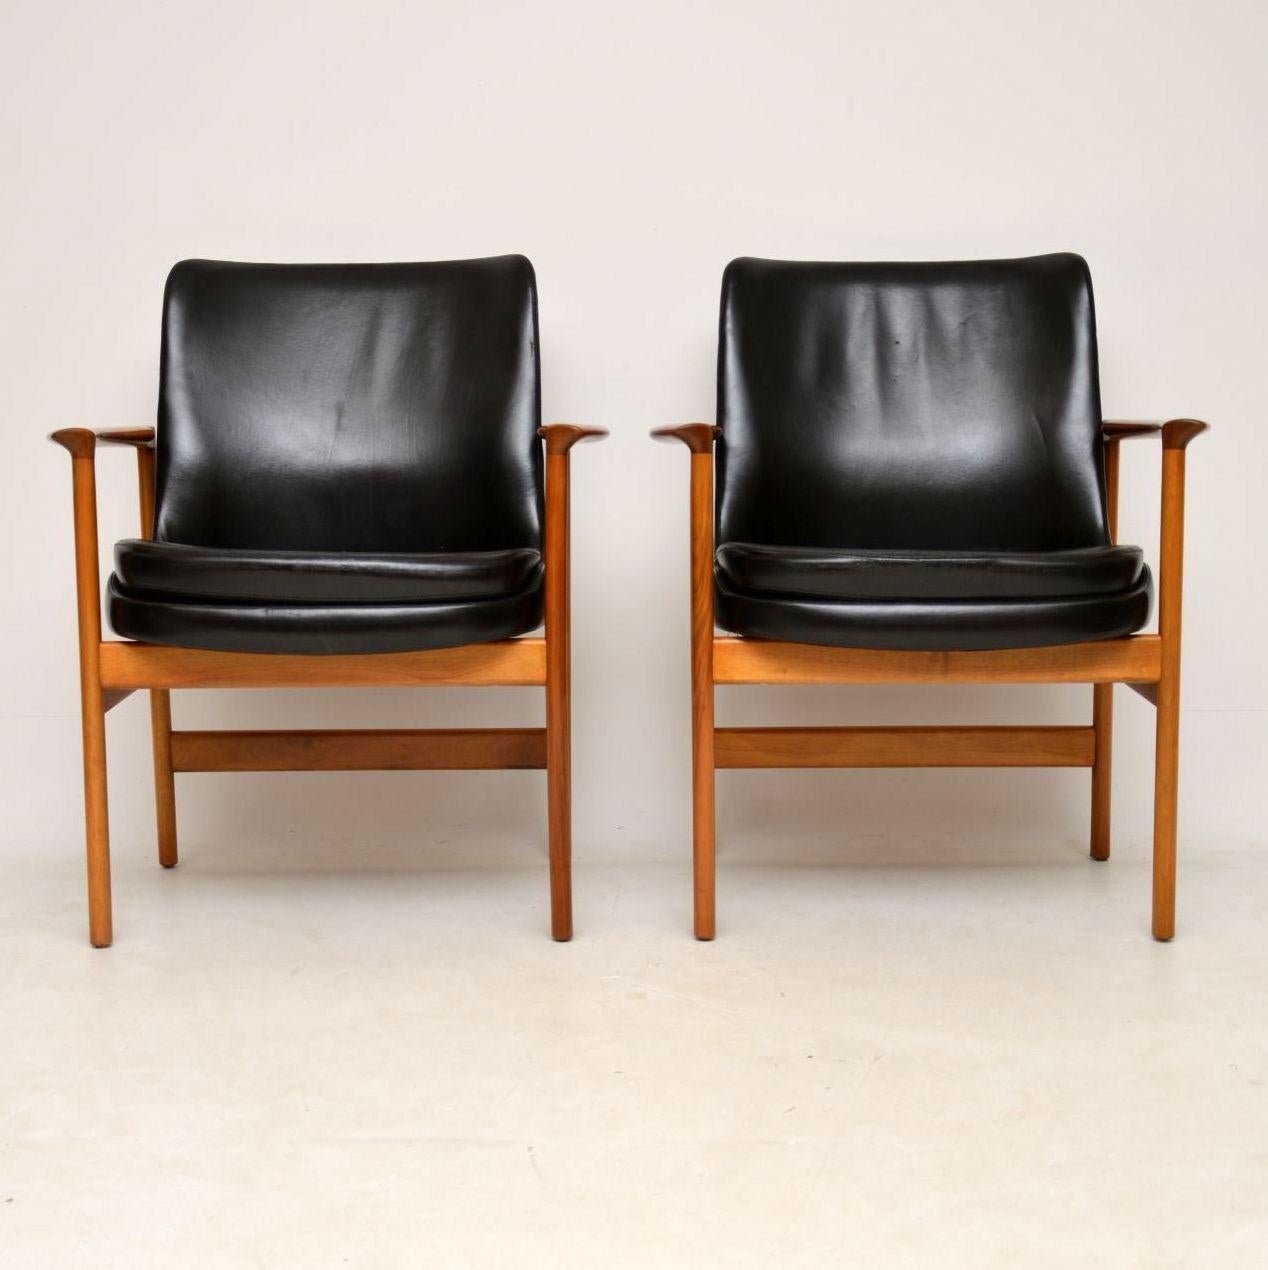 A stunning pair of vintage armchairs in walnut and leather, these were designed by the famous Danish designer IB Kofod Larsen for Froscher, they were made in the 1960s-1970s. The condition is great for their age, we have had the walnut frames fully